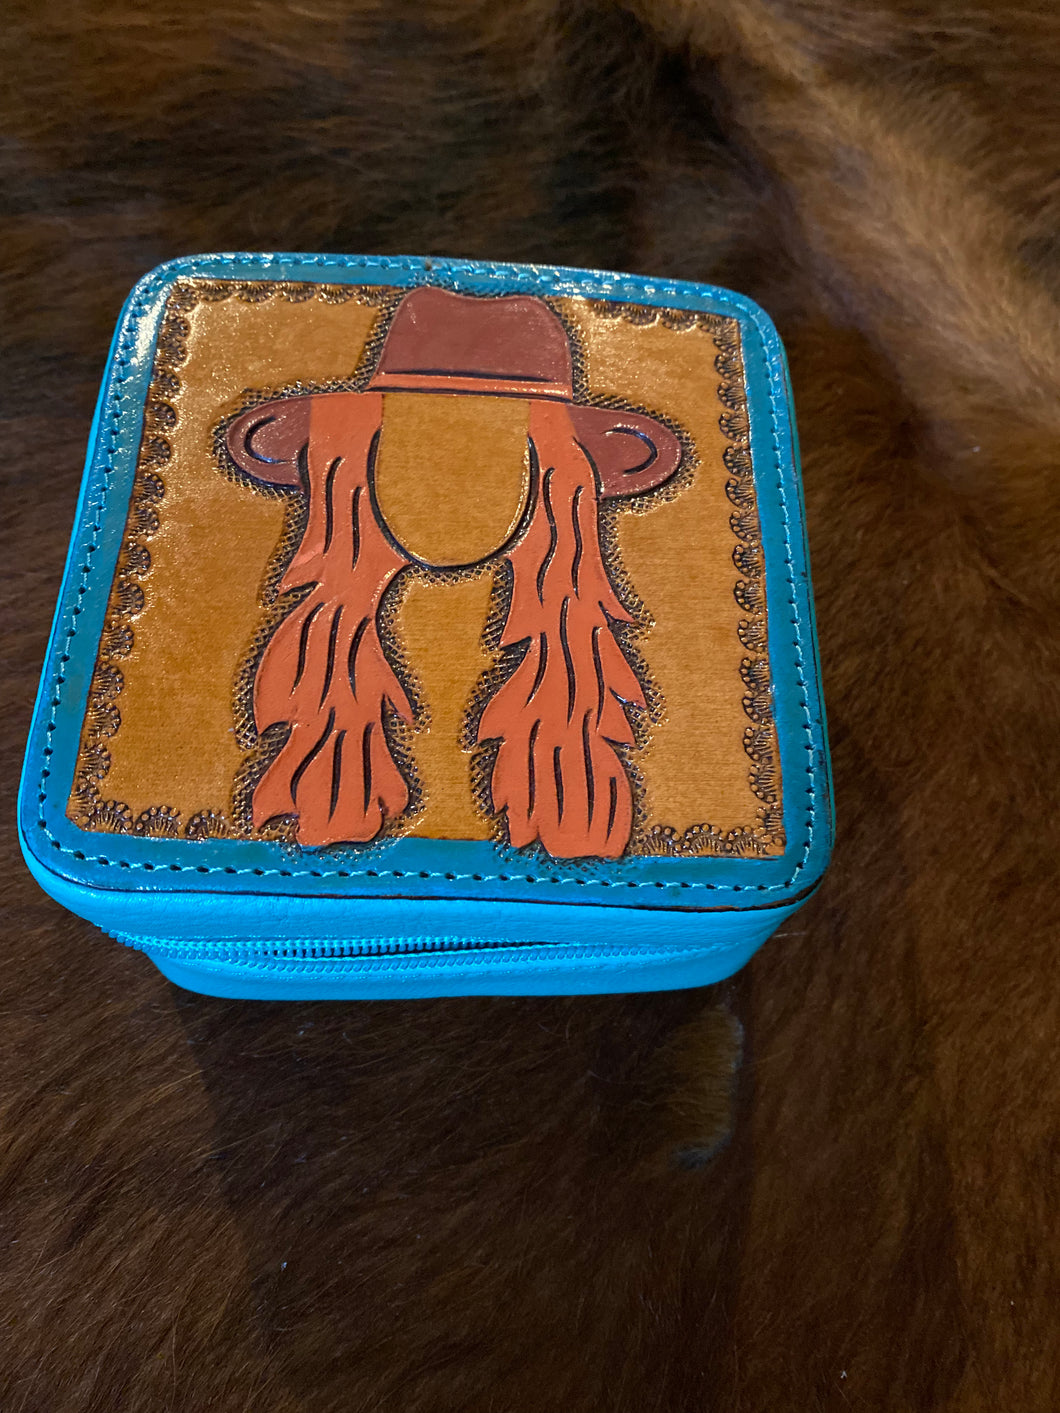 Cowgirl  tooled  top Turquoise jewelry box